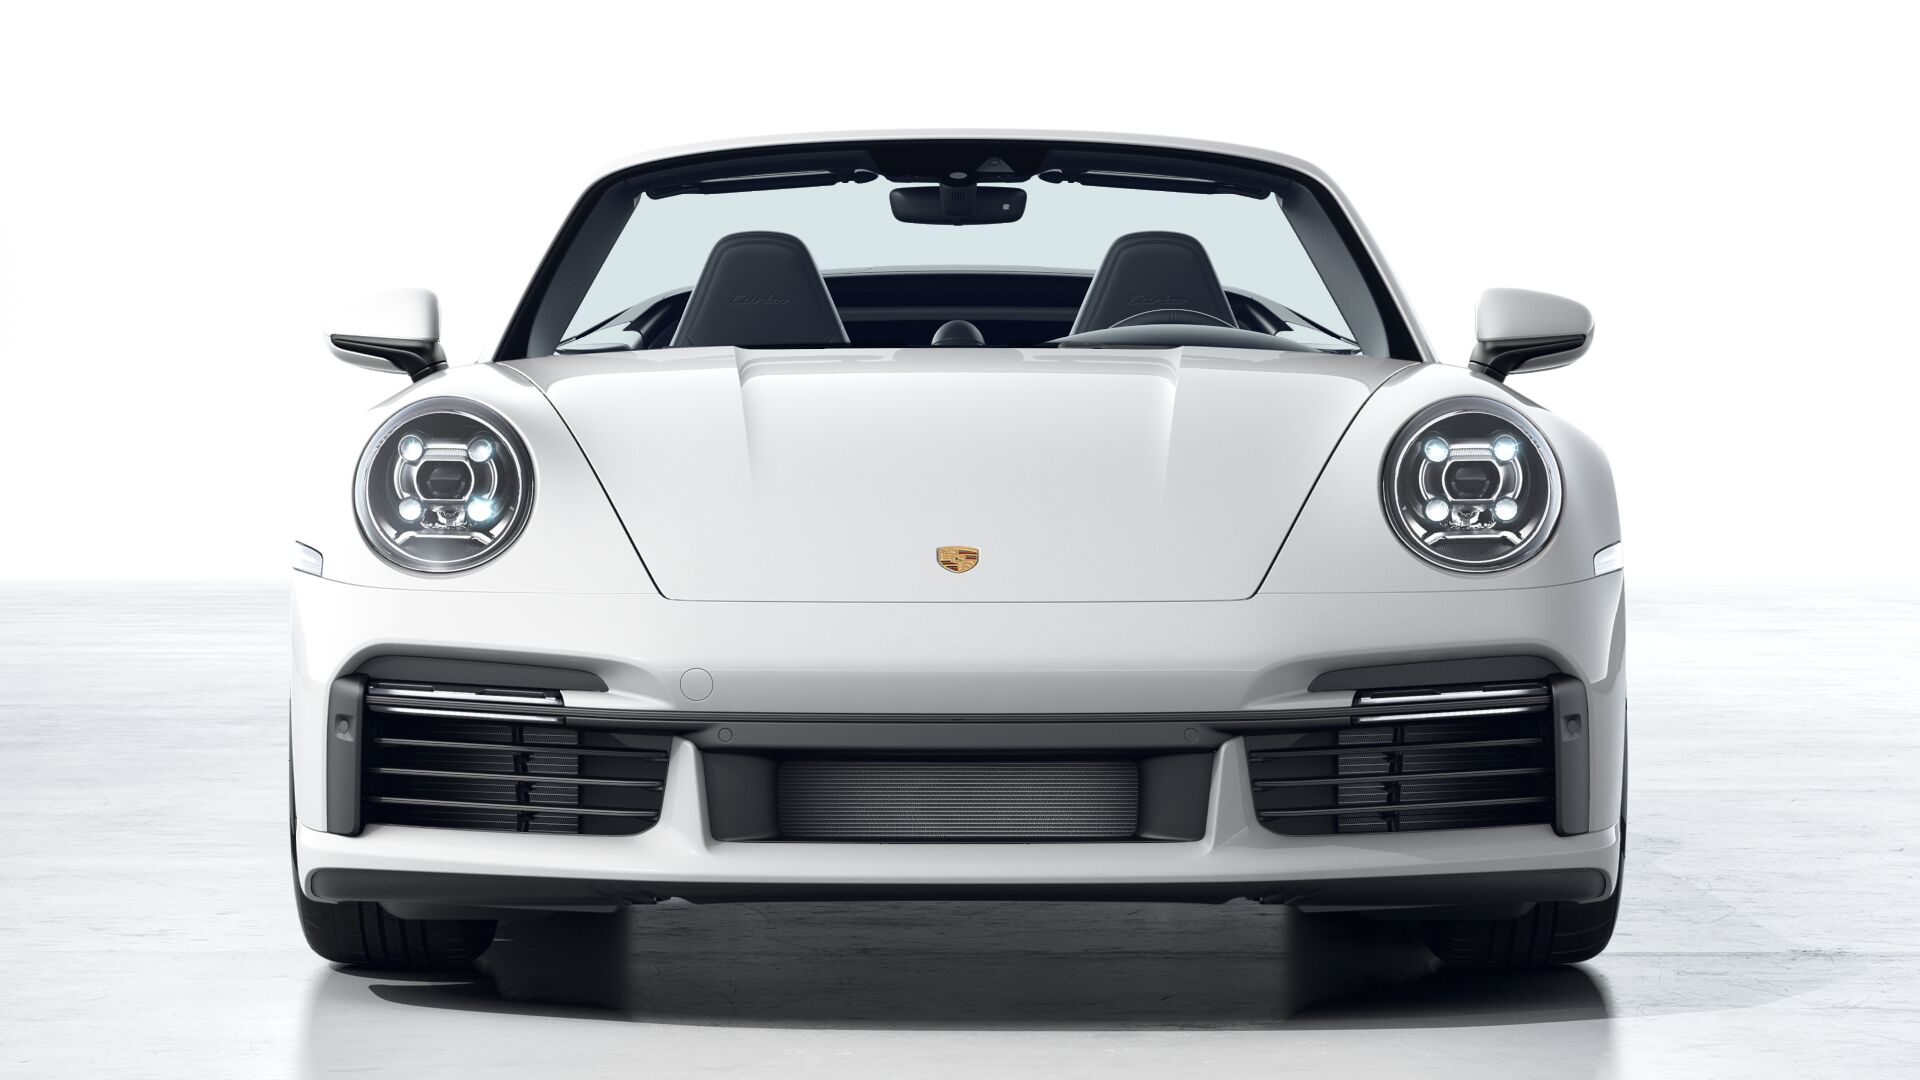 Exterior view of 911 Turbo Cabriolet